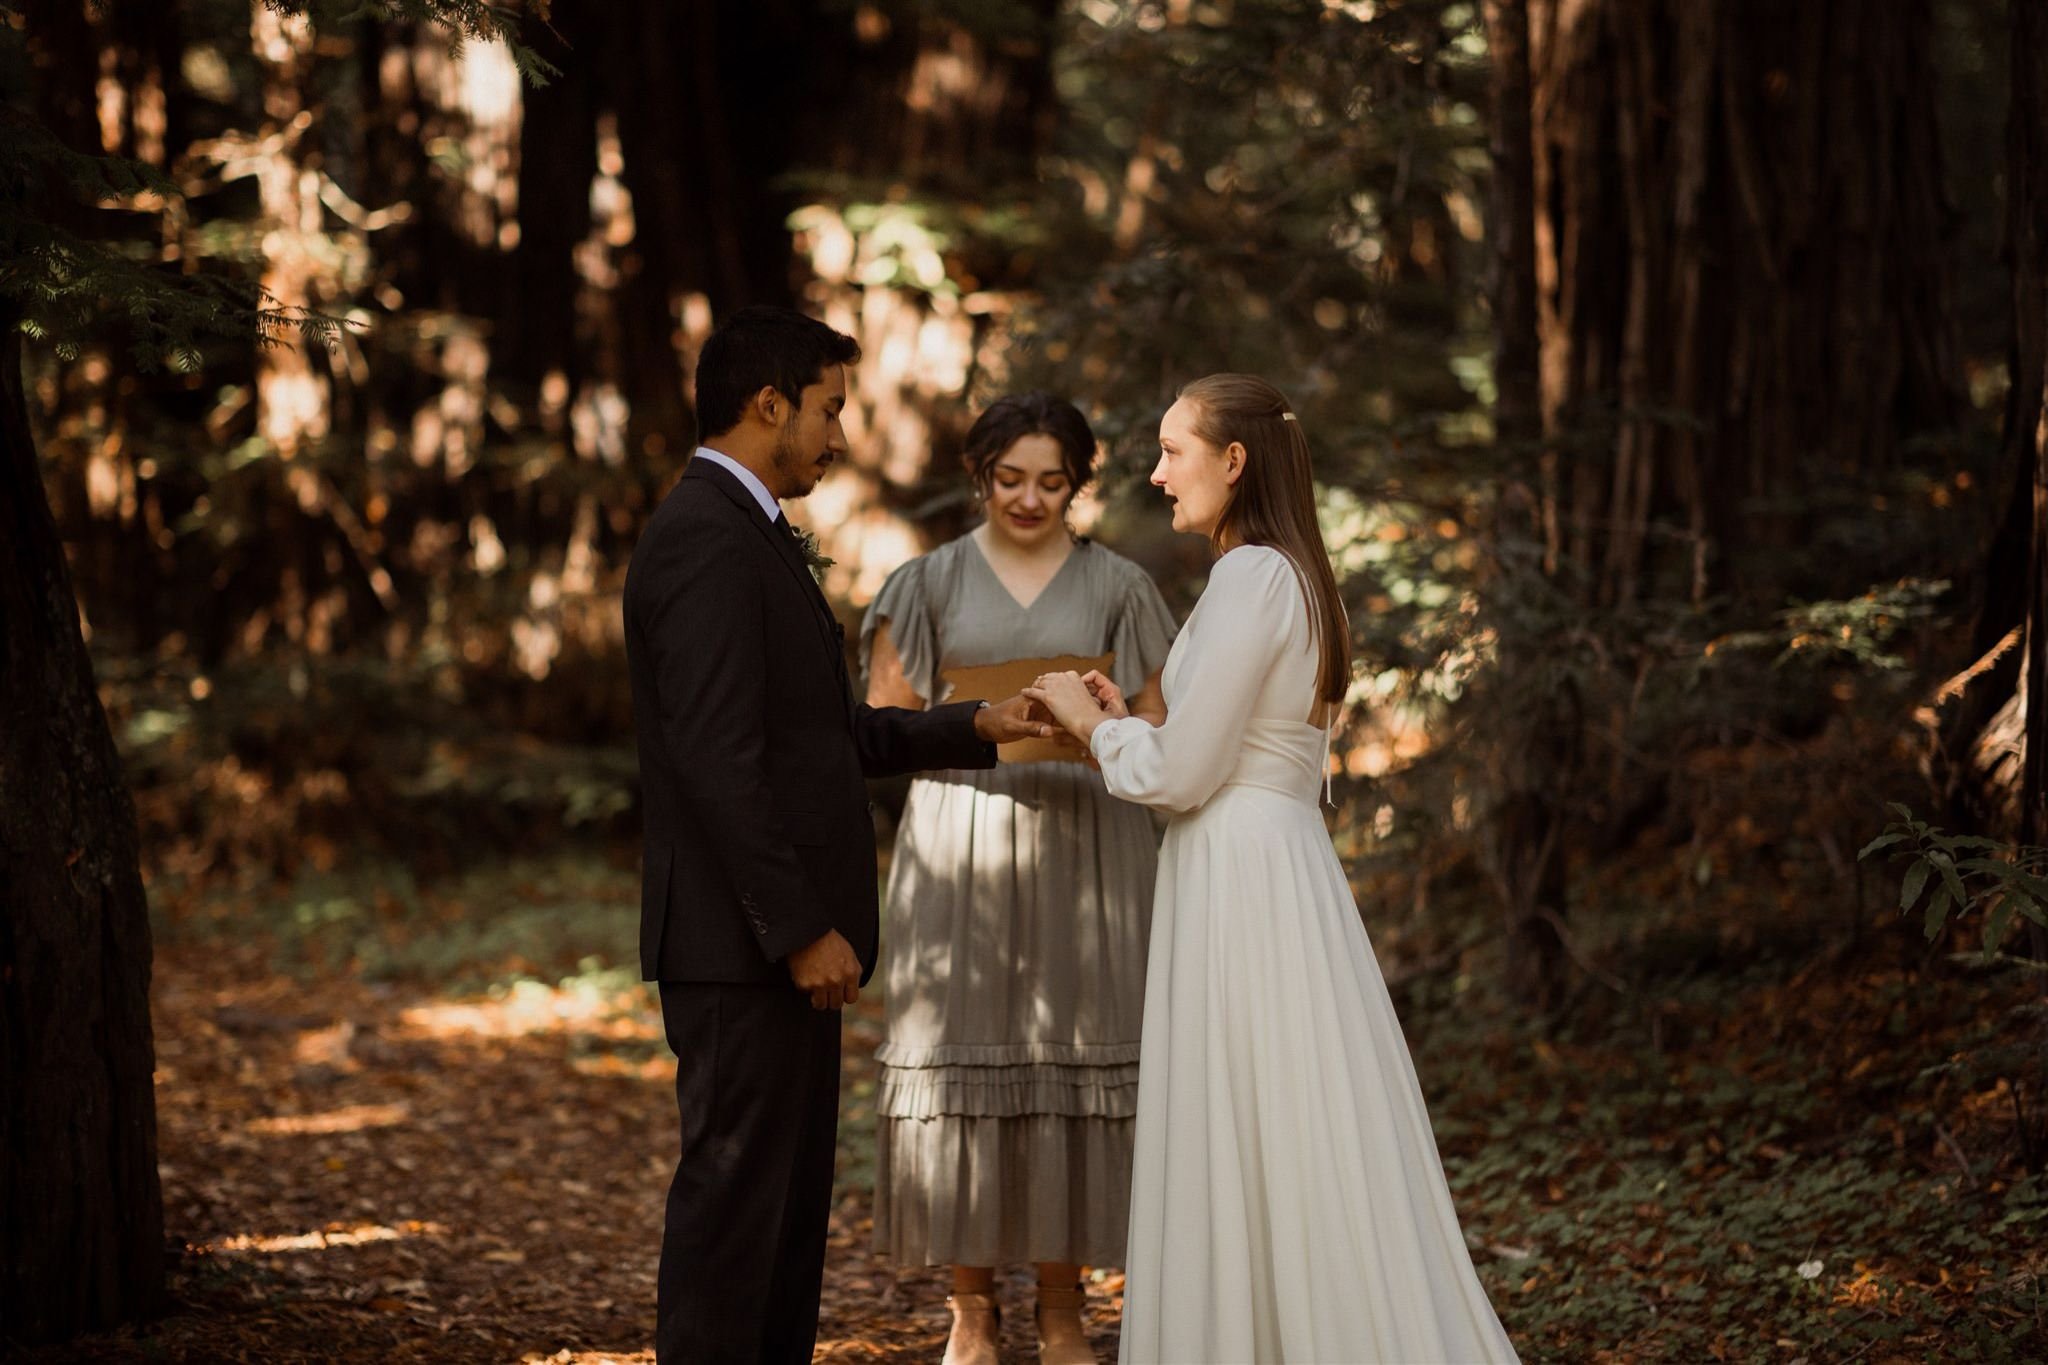 045_Two-Day Big Sur Redwoods Elopement with Family_Will Khoury Elopement Photographer.jpg